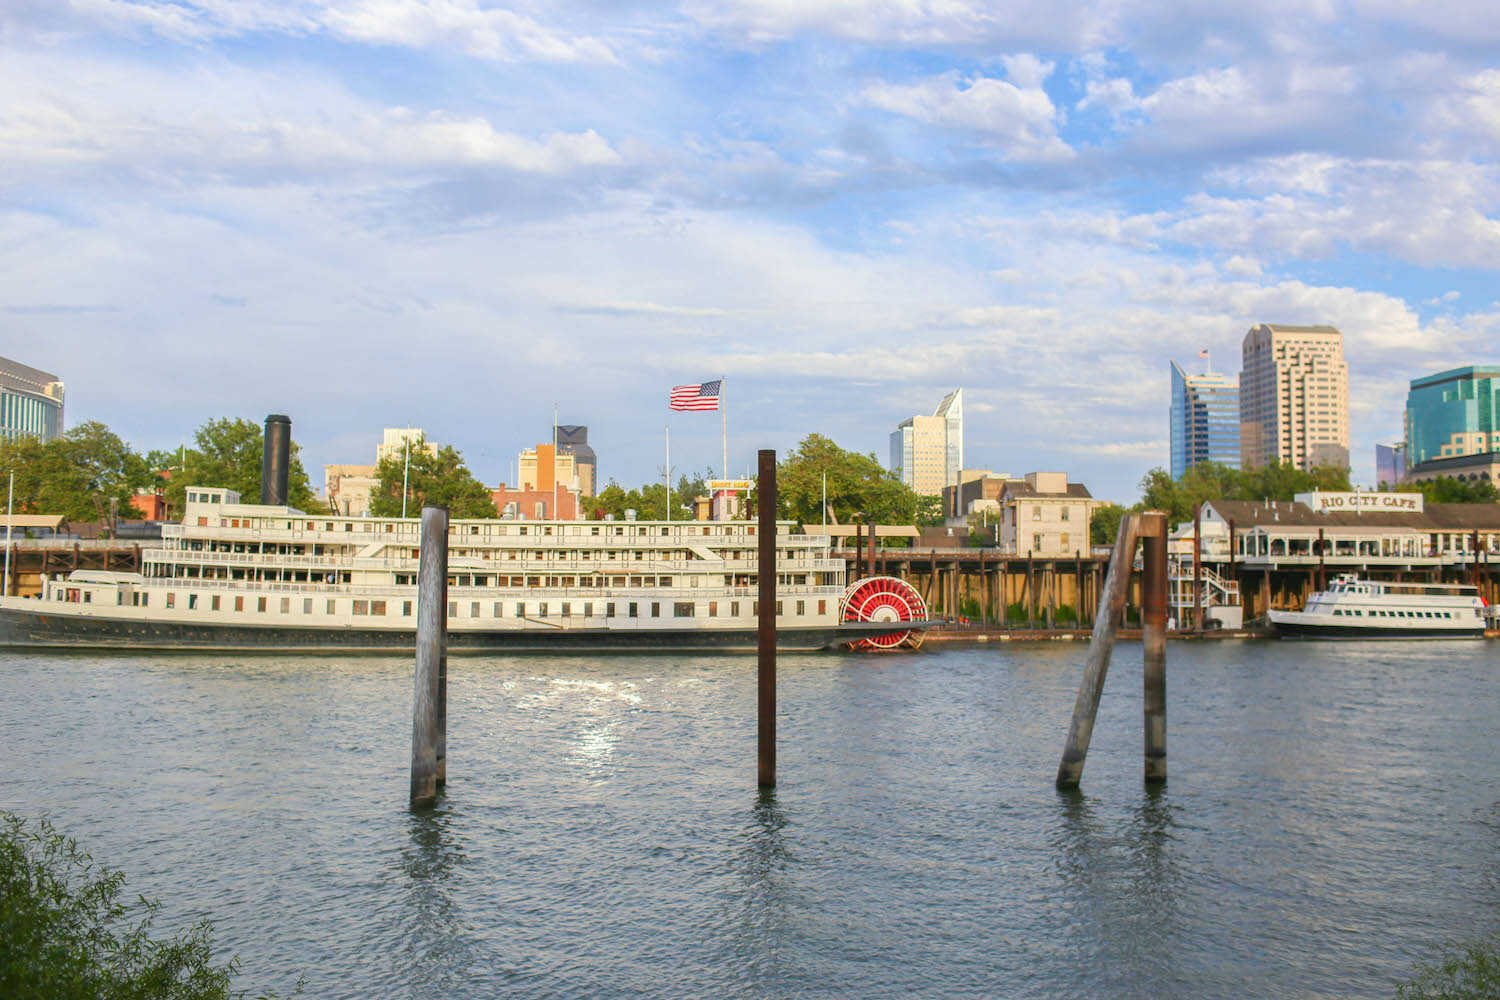 Visitor’s Guide to Old Sacramento - View of the Delta King River Boat from across the river on the West Sacramento Riverwalk.